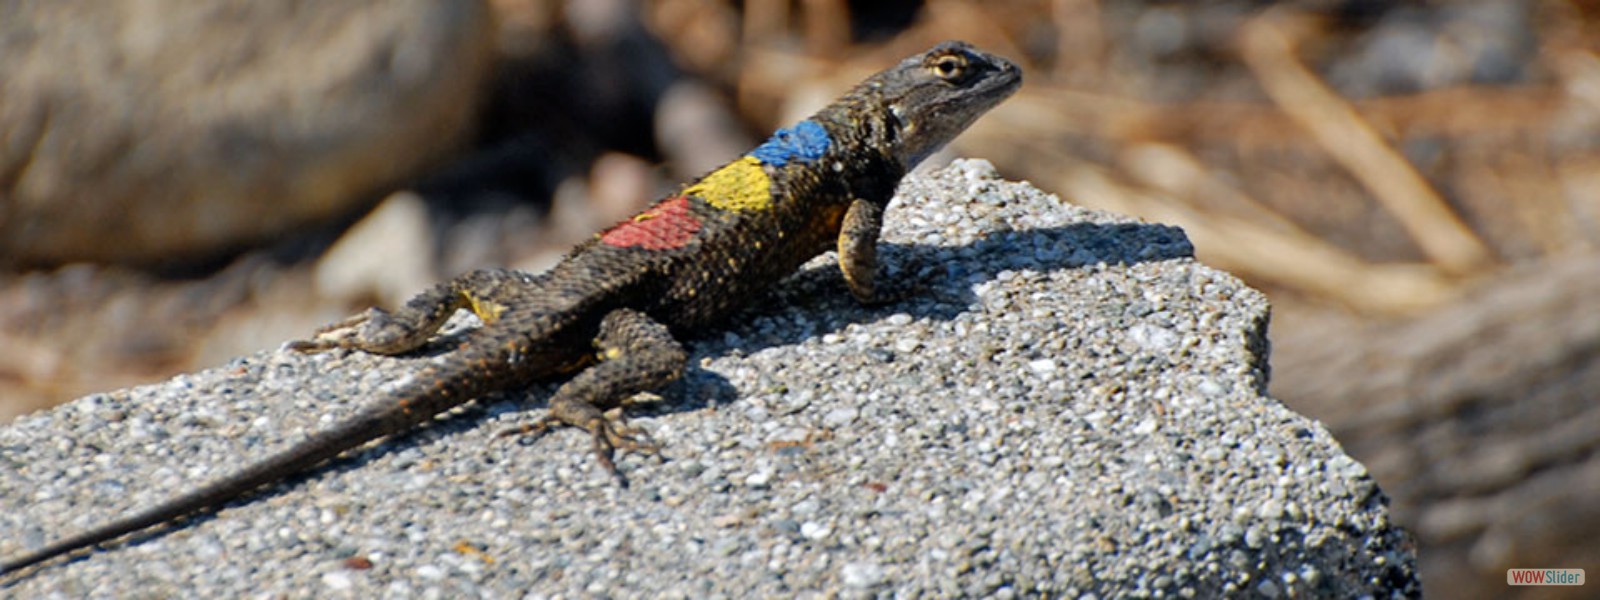 A Western Fence Lizard marked for an experiment